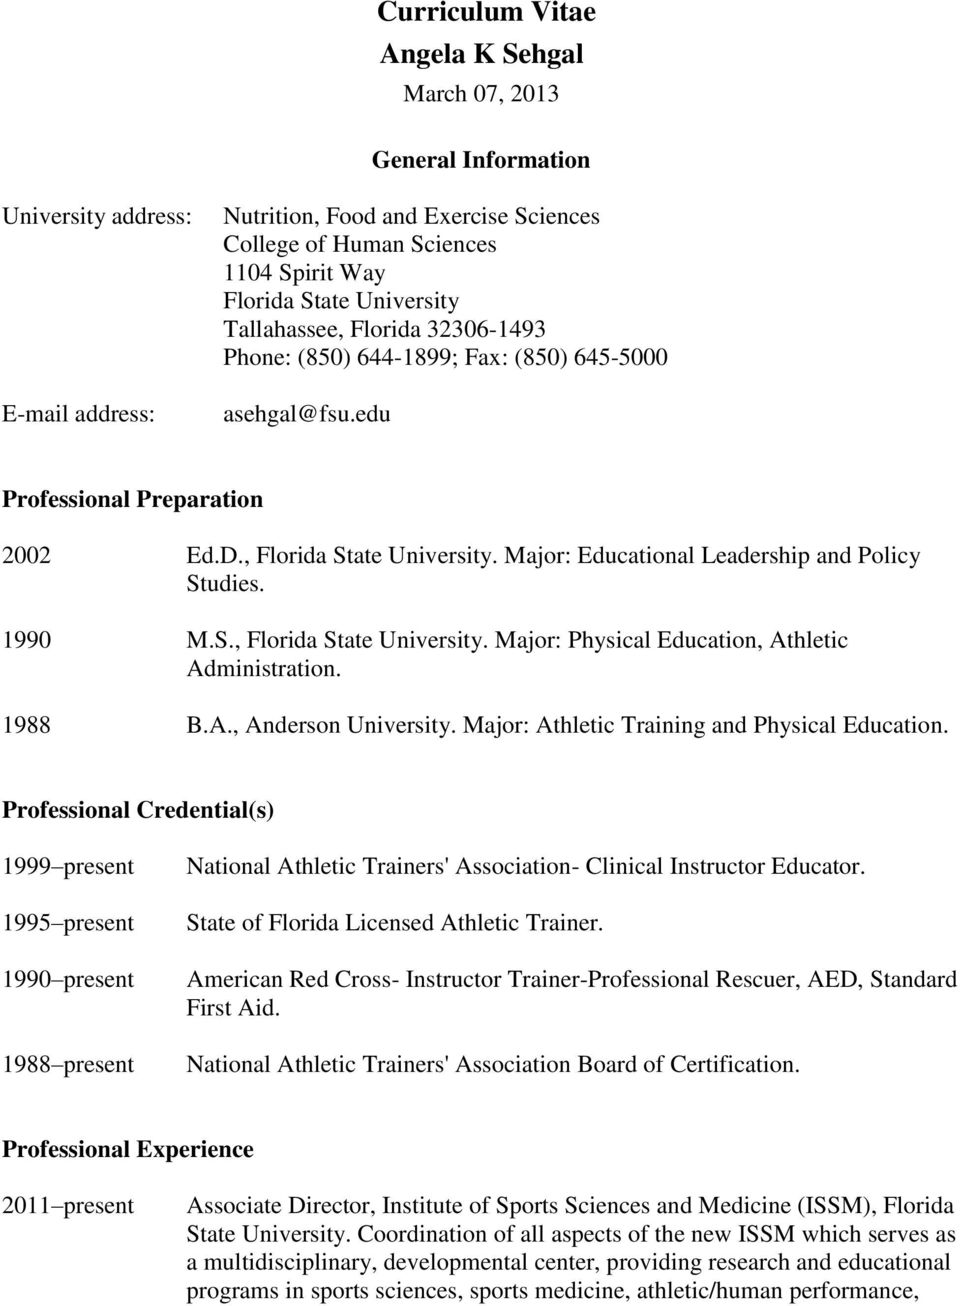 Major: Educational Leadership and Policy Studies. 1990 M.S., Florida State University. Major: Physical Education, Athletic Administration. 1988 B.A., Anderson University.